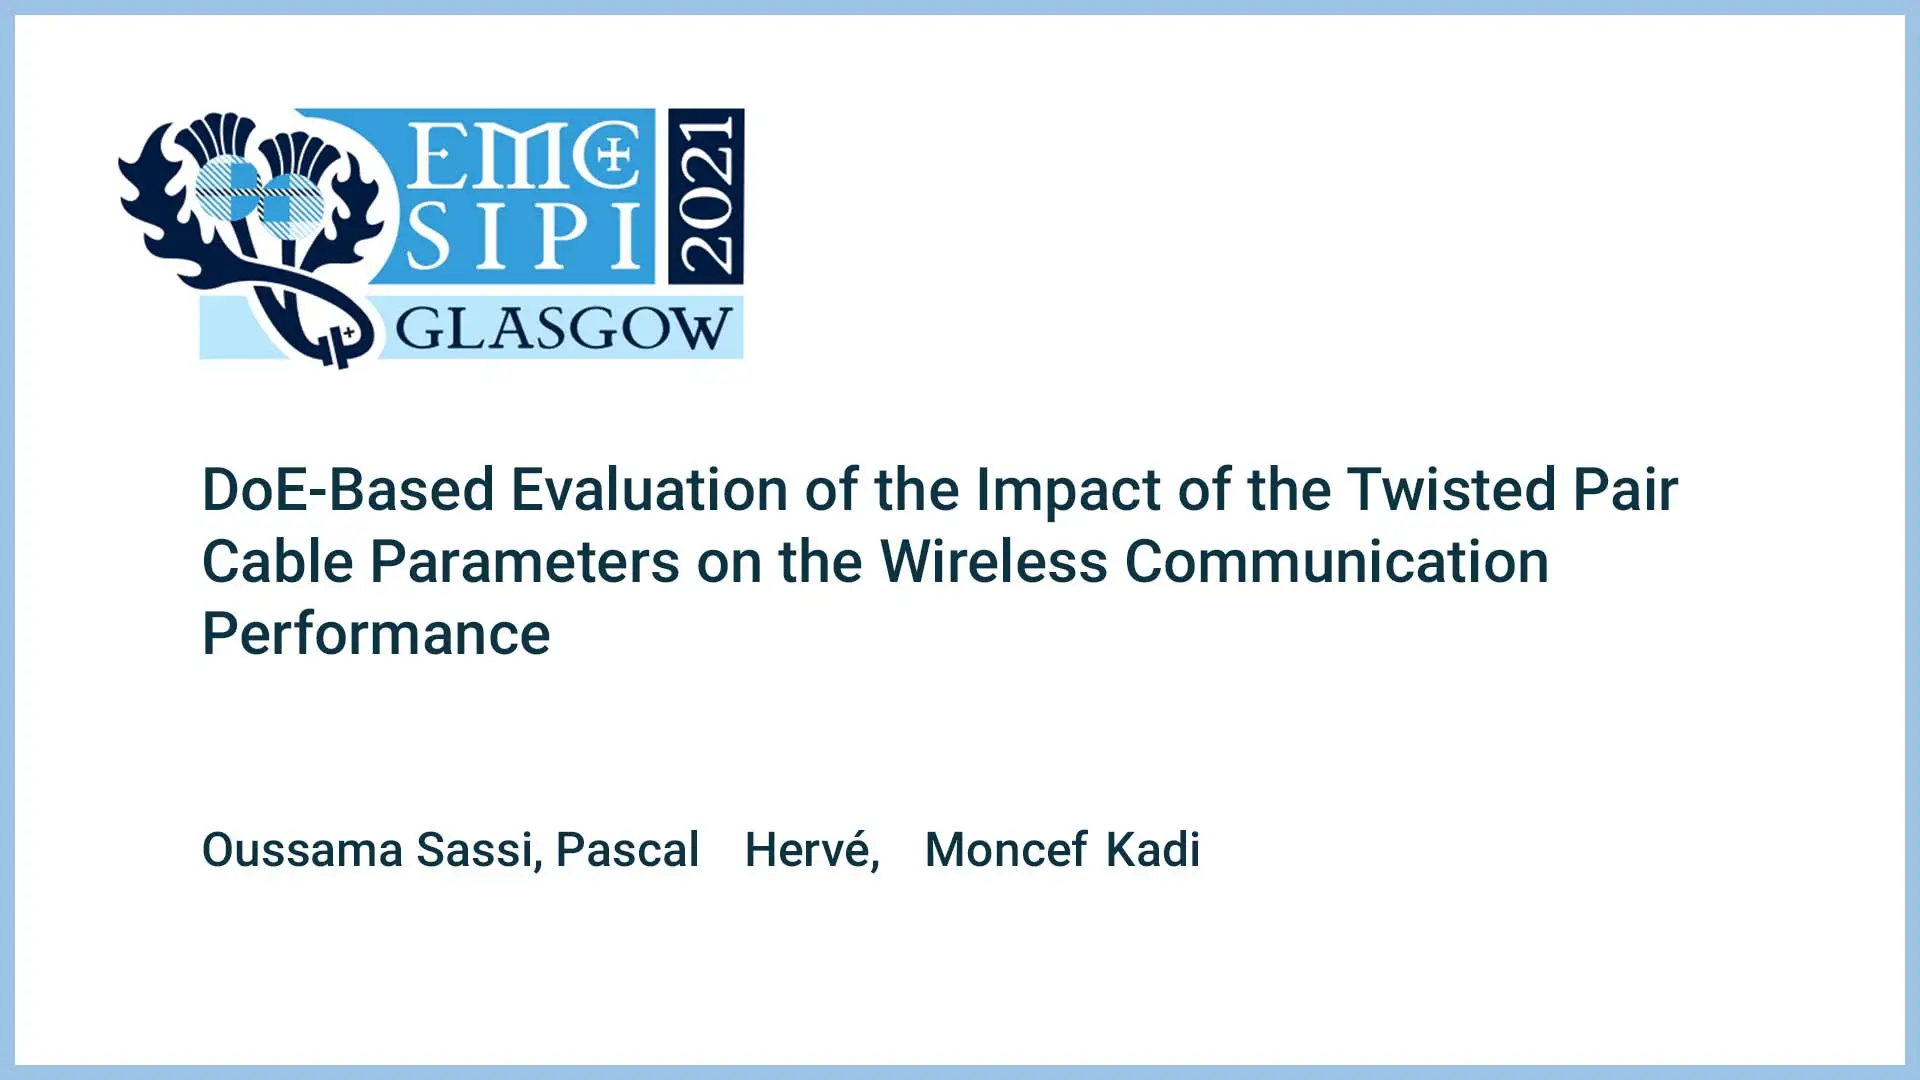 DoE-Based Evaluation of the Impact of the Twisted Pair Cable Parameters on the Wireless Communication Performance